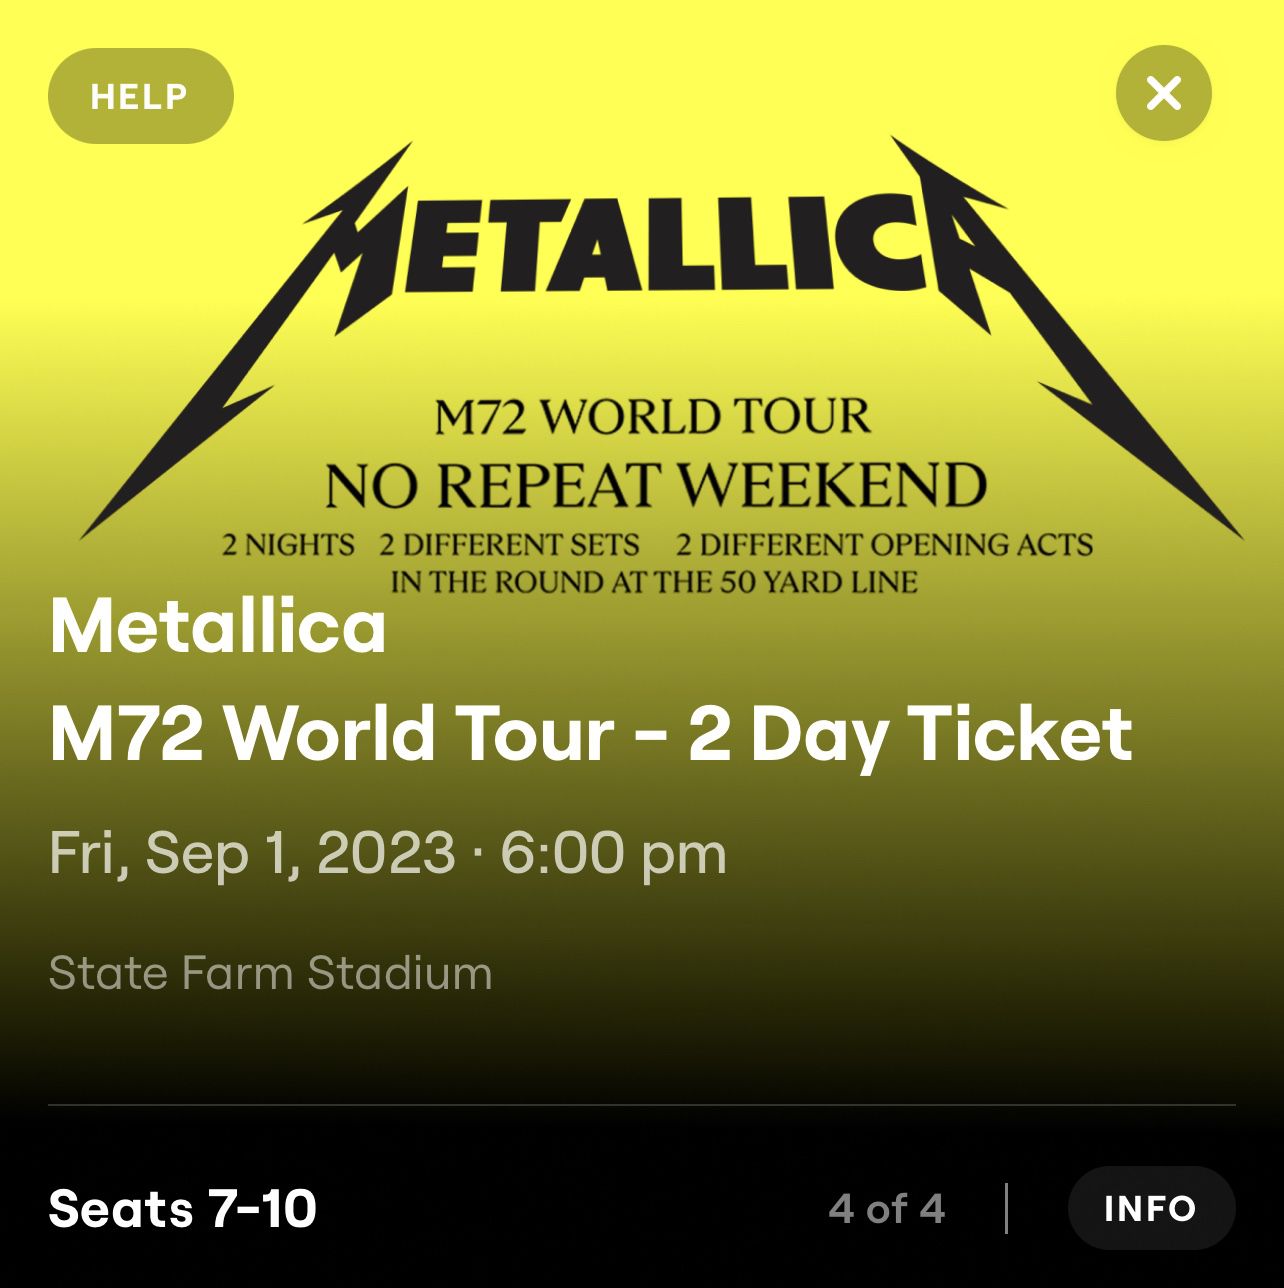 Metallica M72 Workd Tour Tickets For Both Days